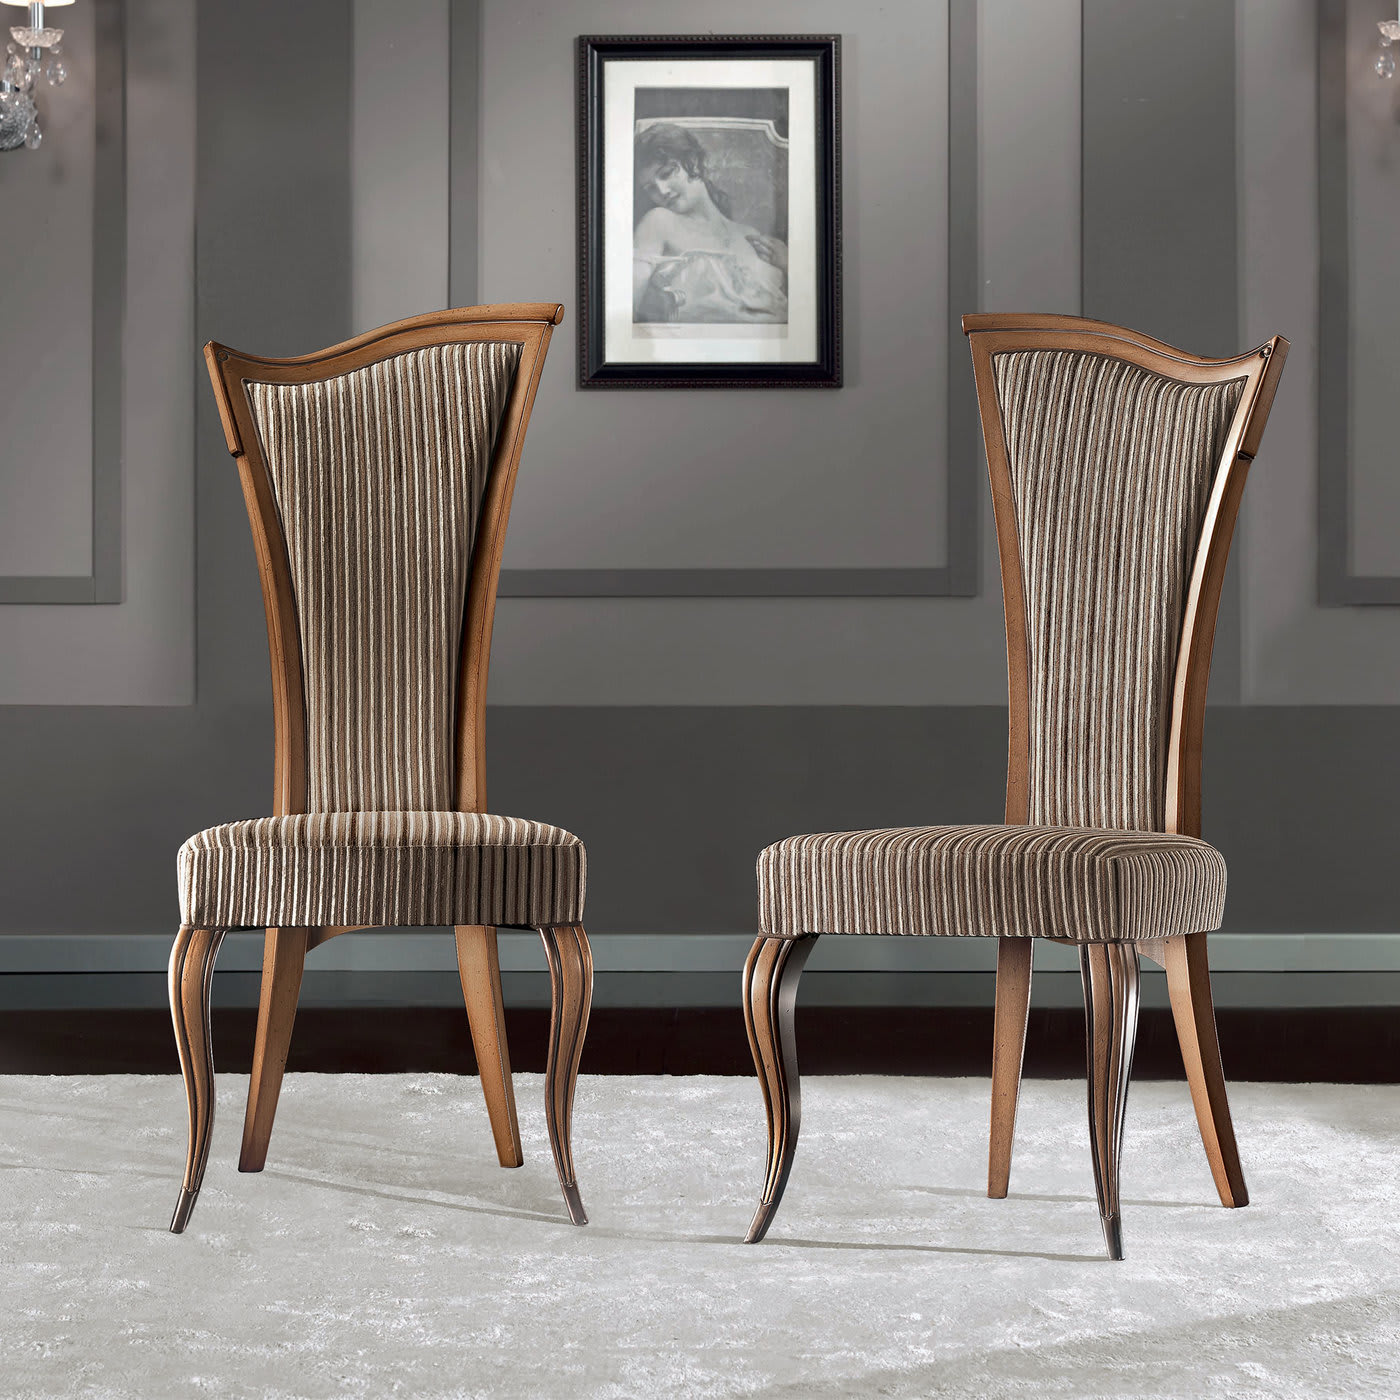 Set of 6 Striped Dining Chairs - Modenese Gastone